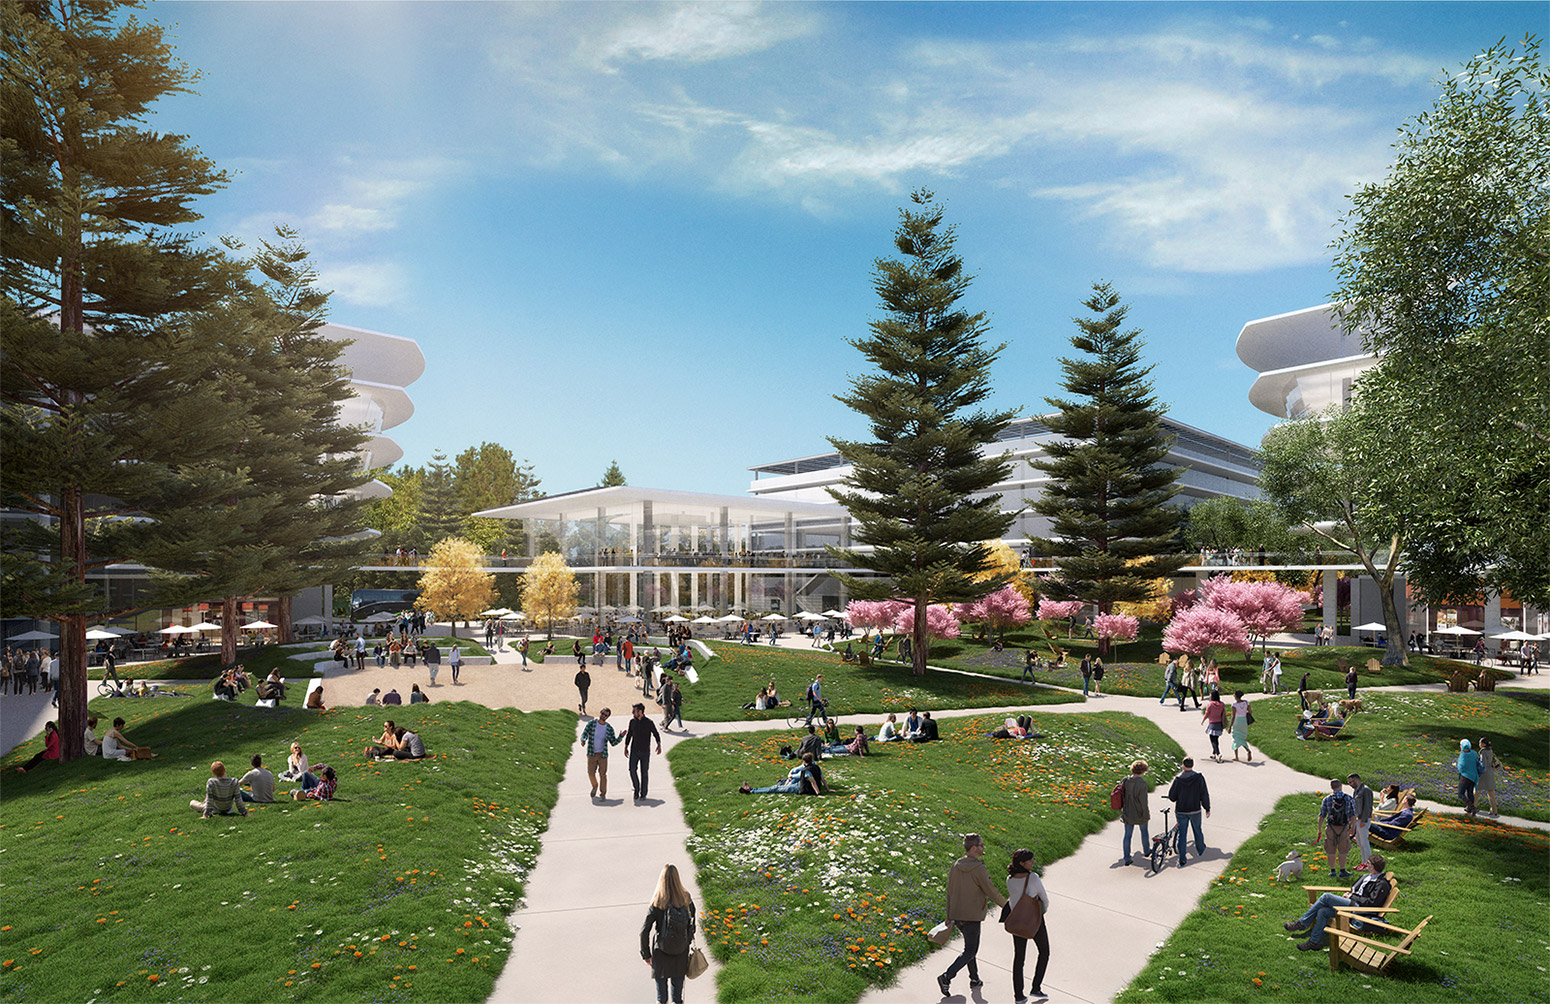 Apple Signs Massive Deal for New Campus in Sunnyvale? [Images]